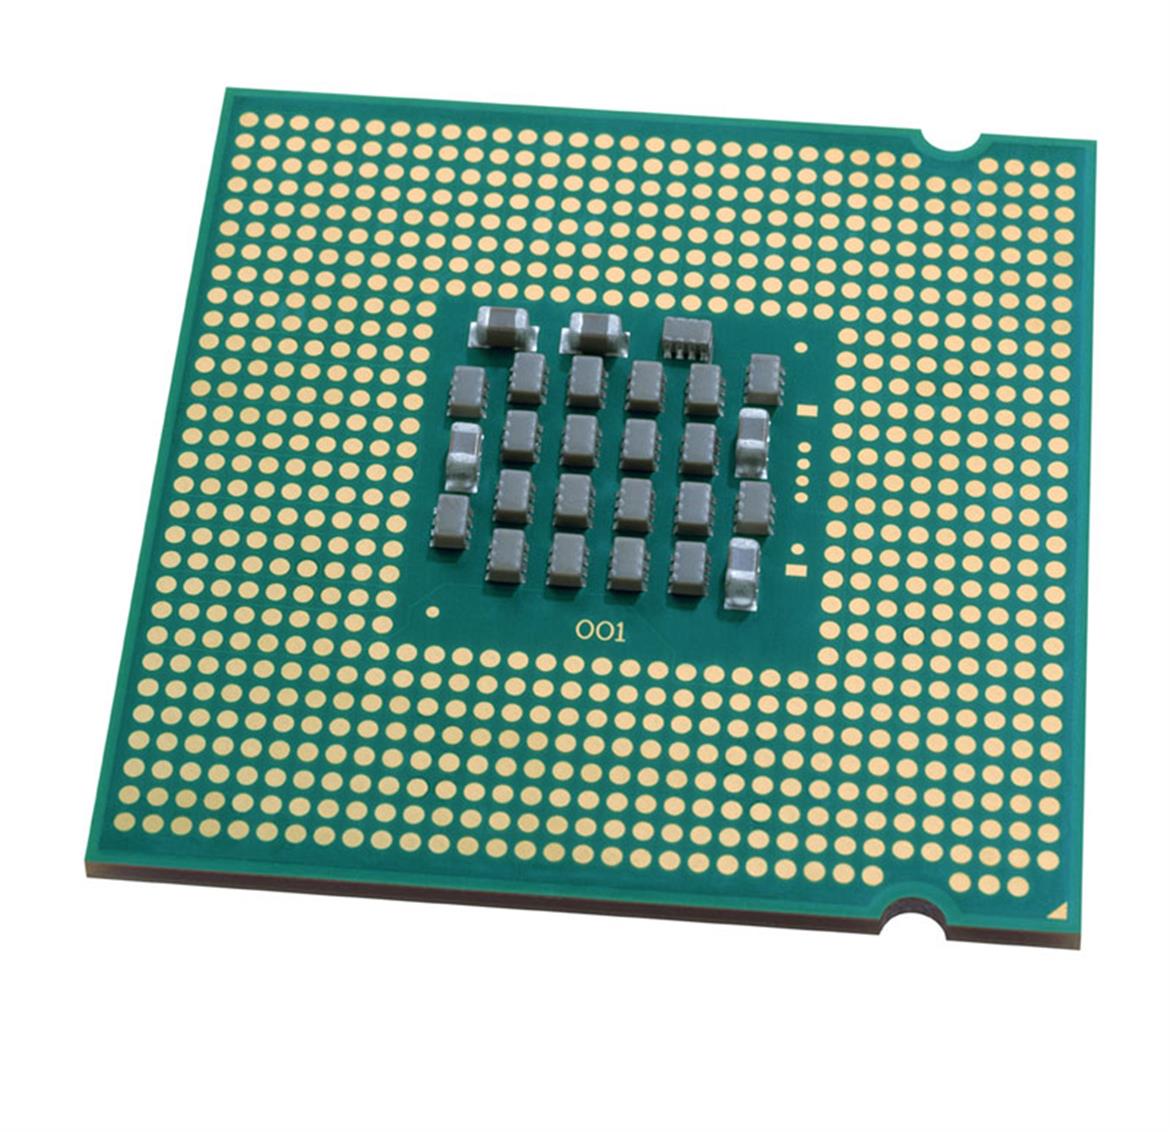 Intel Pentium 4 6XX Sequence and 3.73GHz Extreme Edition Processors